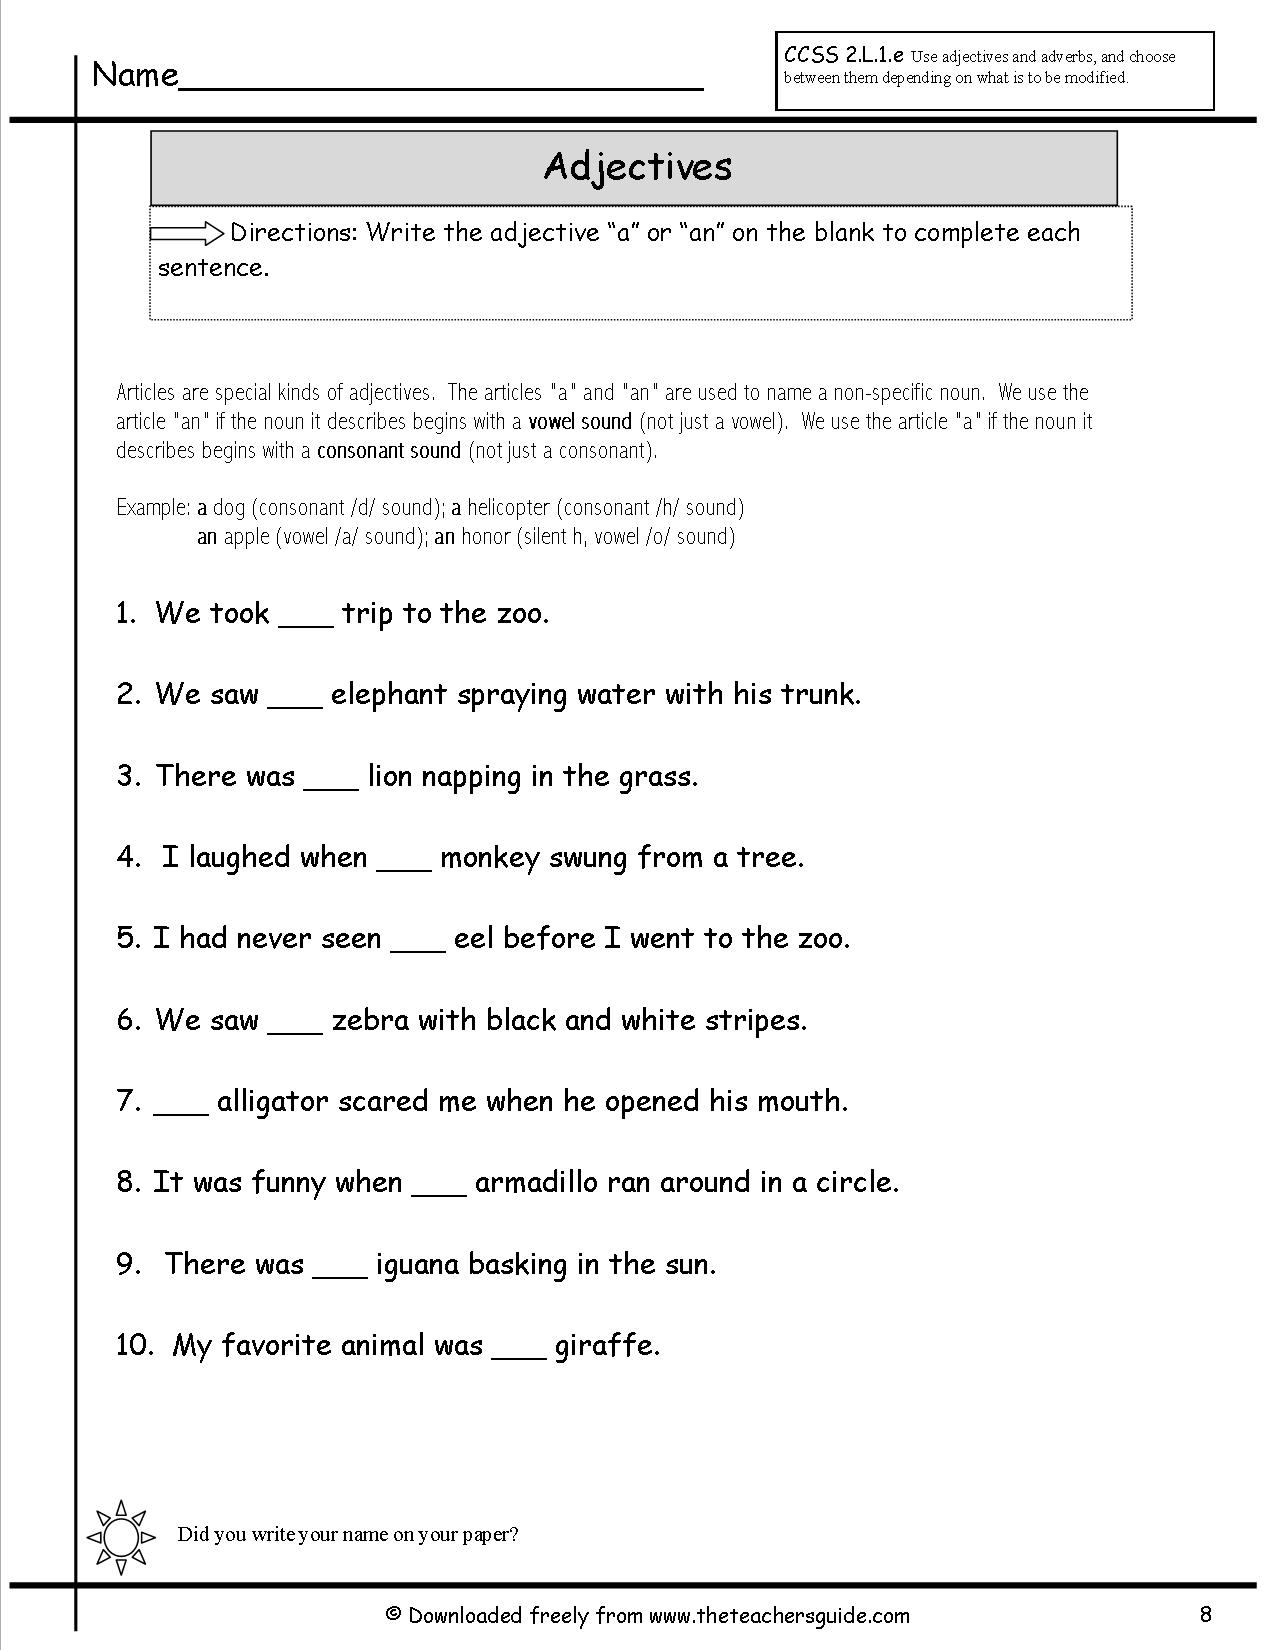 article-adjectives-worksheet-for-2nd-3rd-grade-lesson-planet